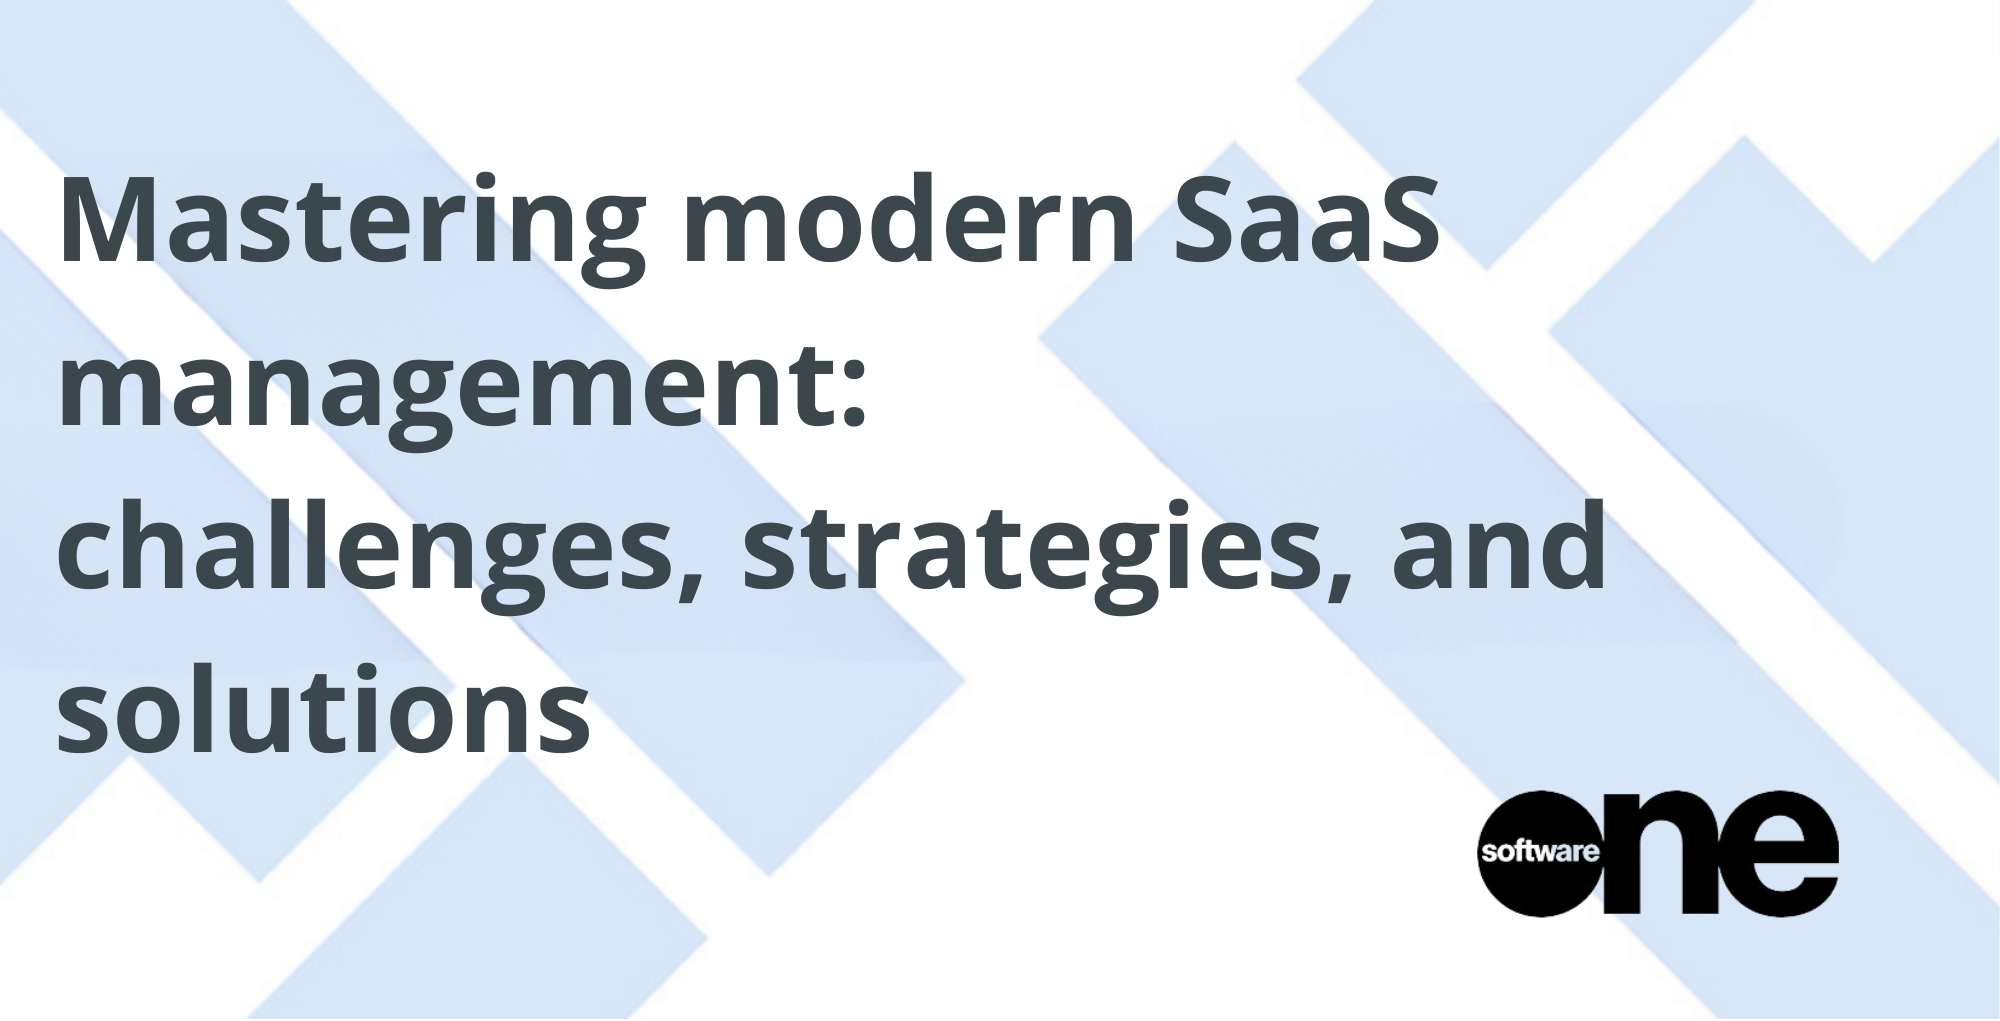 Mastering modern SaaS management_ challenges, strategies, and solutions